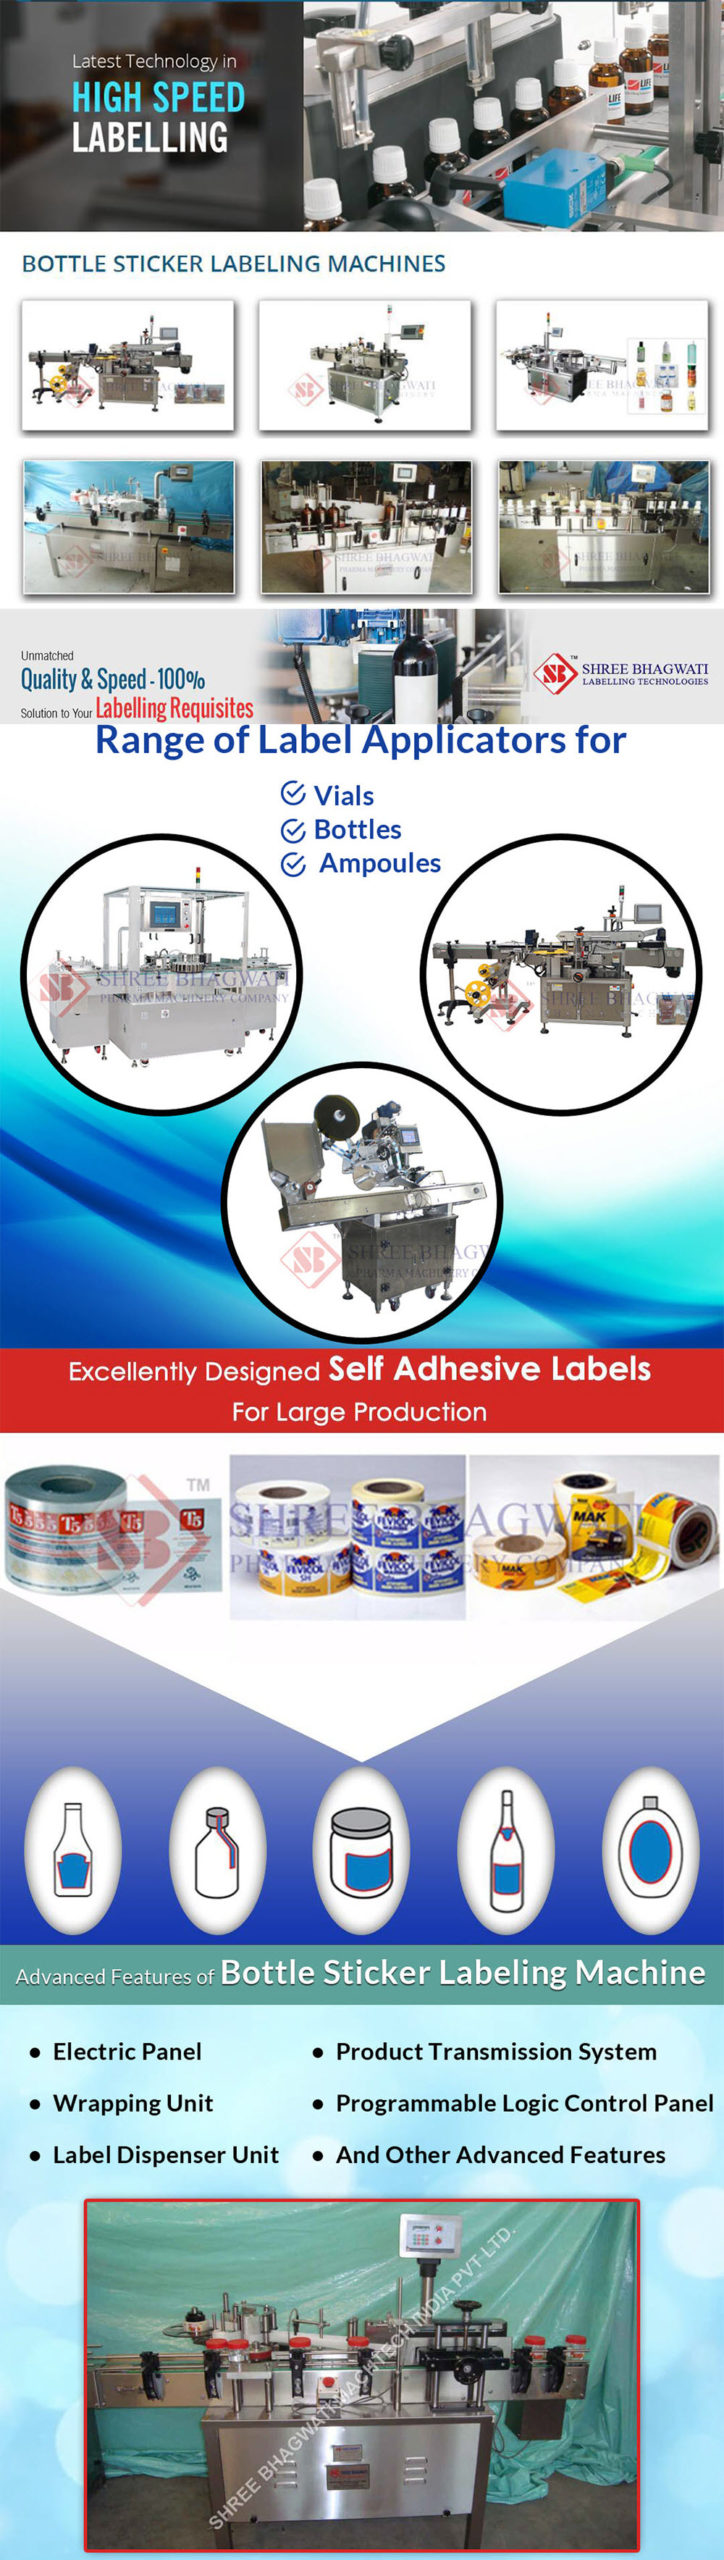 High Performance Label Applicators with Superlative Technologies Labeling Machines